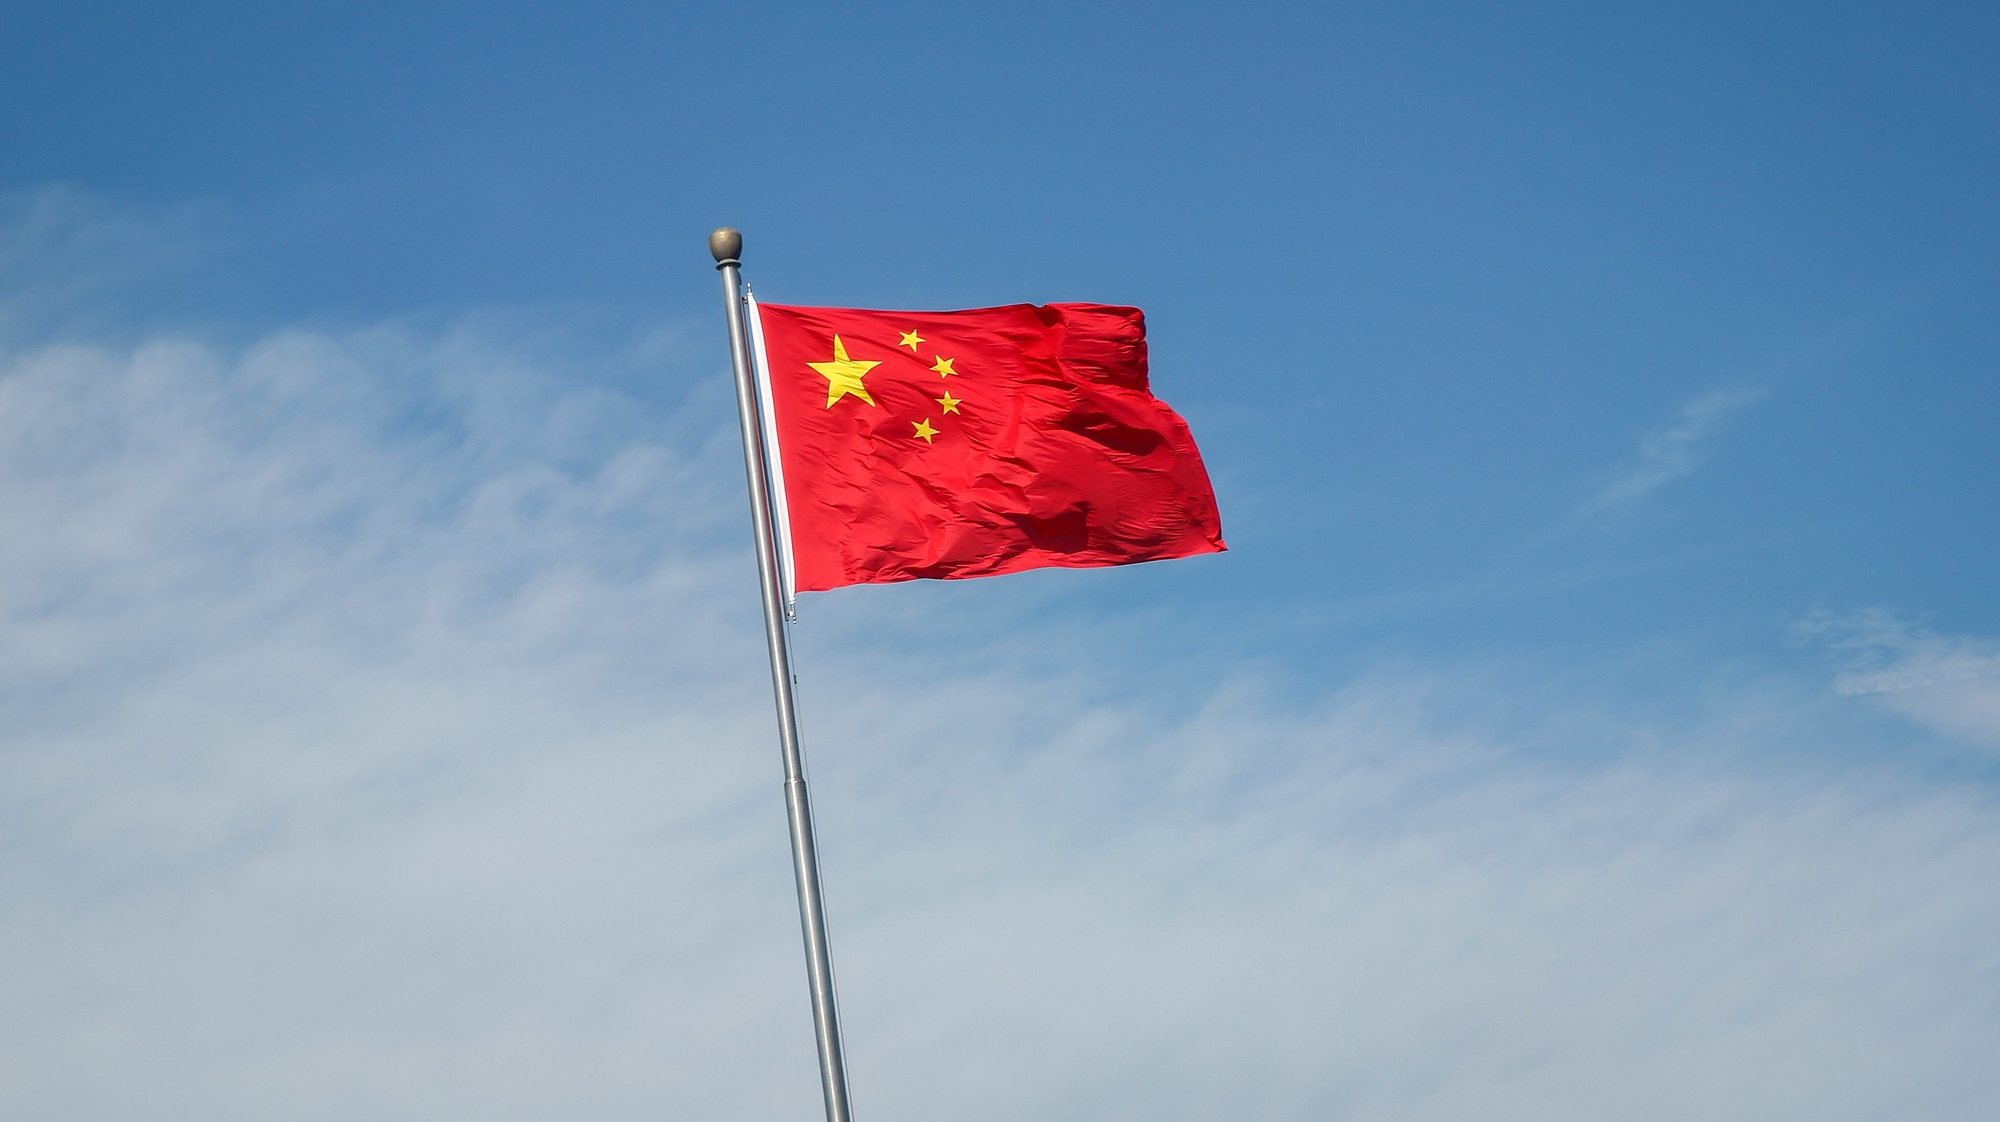 epa10133364 China&#039;s flag flutters along a road in Beijing, China, 22 August 2022. China has cut its benchmark loan rates to help revive its economy. China&#039;s one year loan prime rate was cut from 3.7 percent to 3.65 percent, while the loan rates for mortgages were cut from 4.45 percent to 4.3 percent, the People&#039;s Bank of China (PBOC) said.  EPA/MARK R. CRISTINO